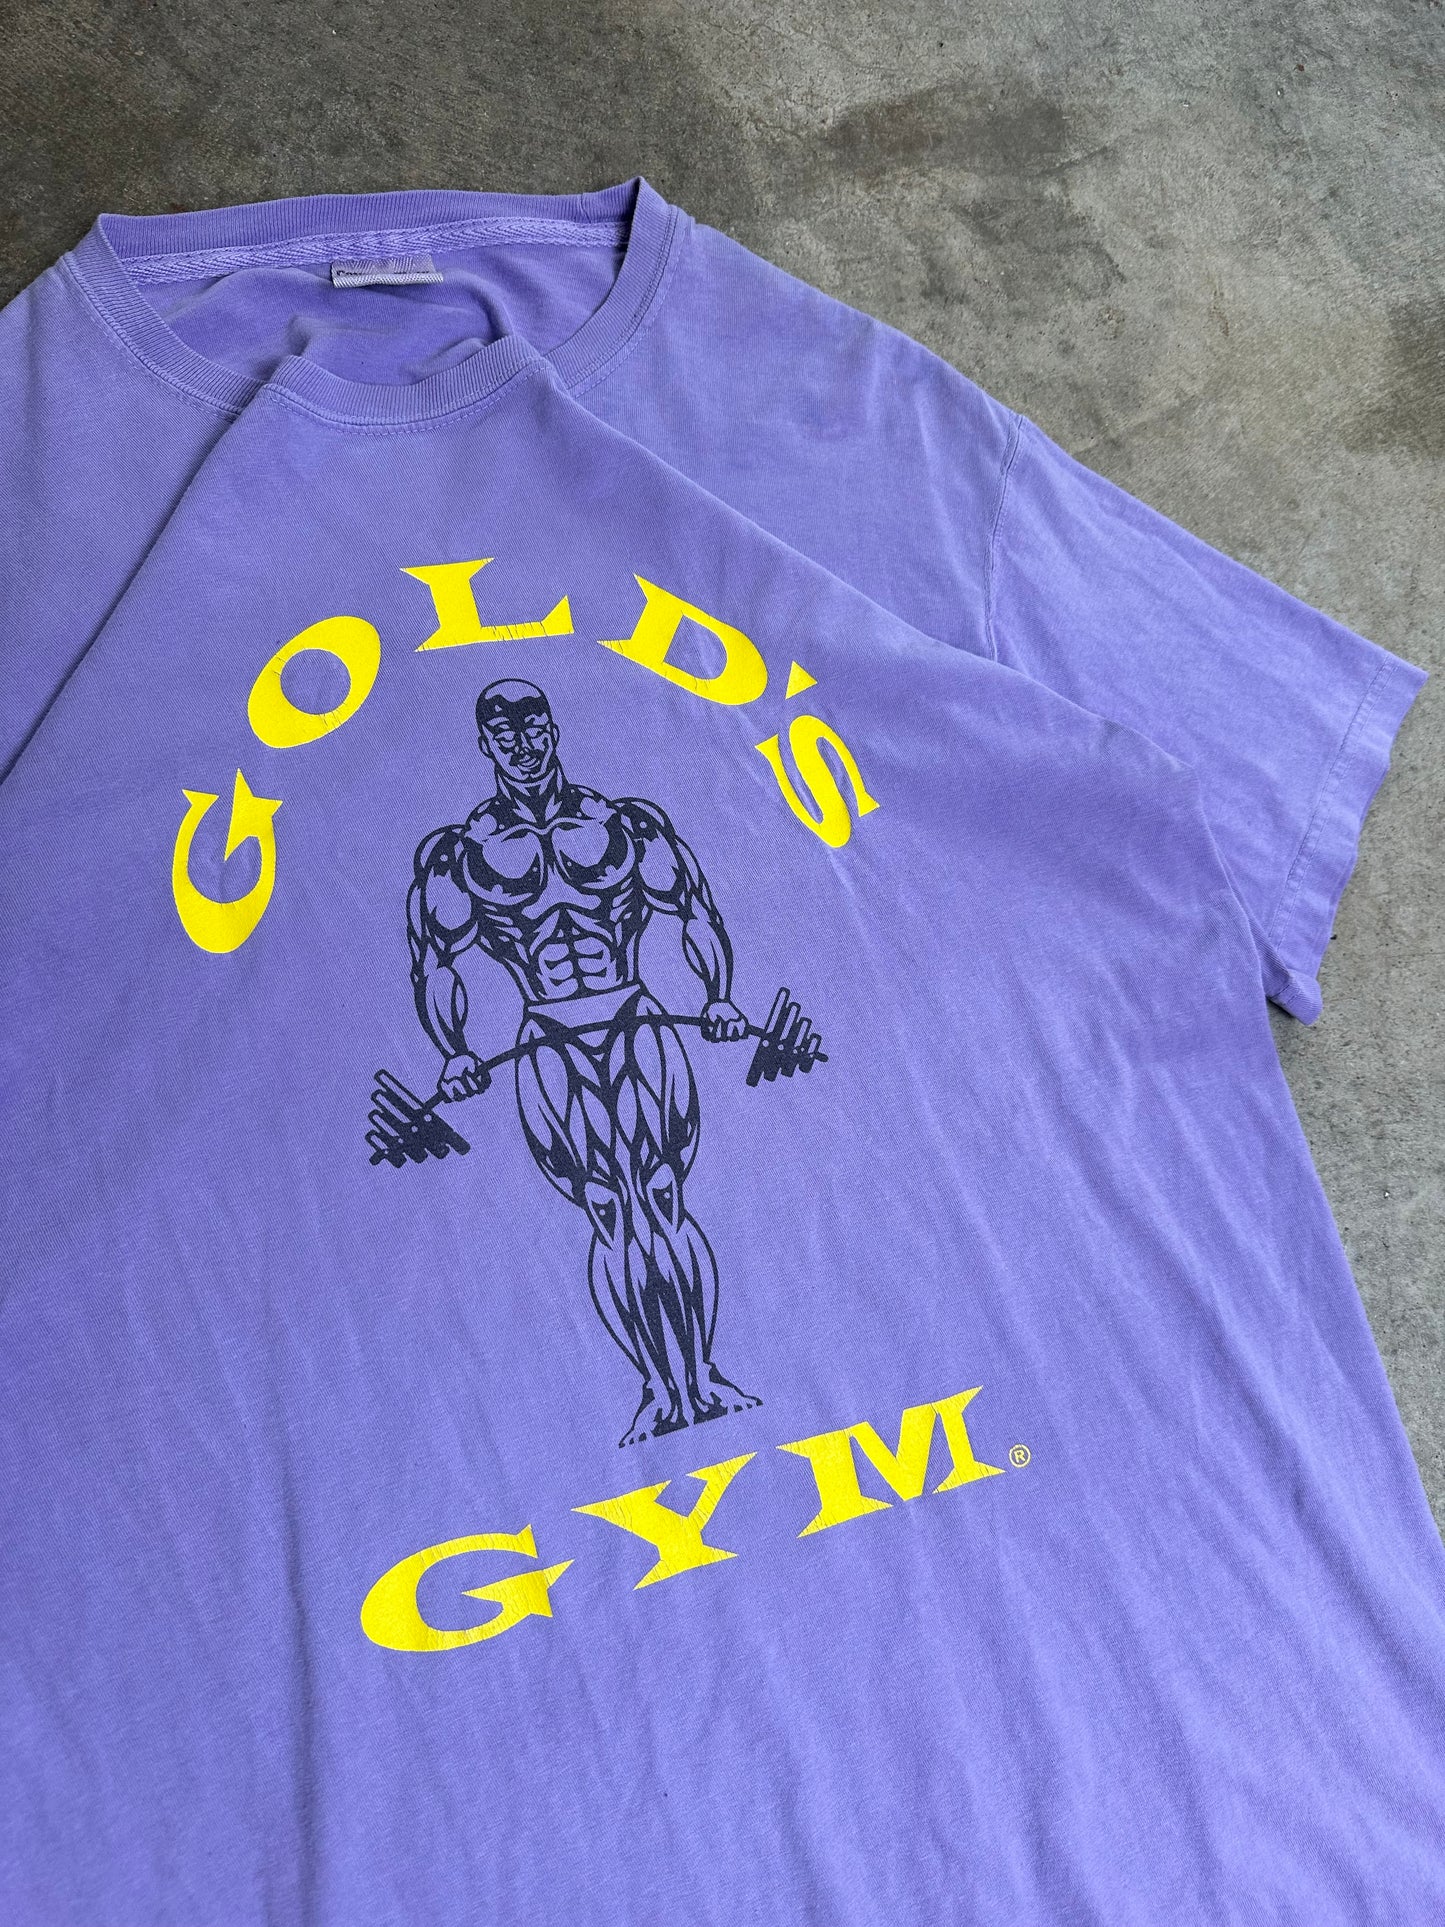 (M) 00s Gold's Gym Tee